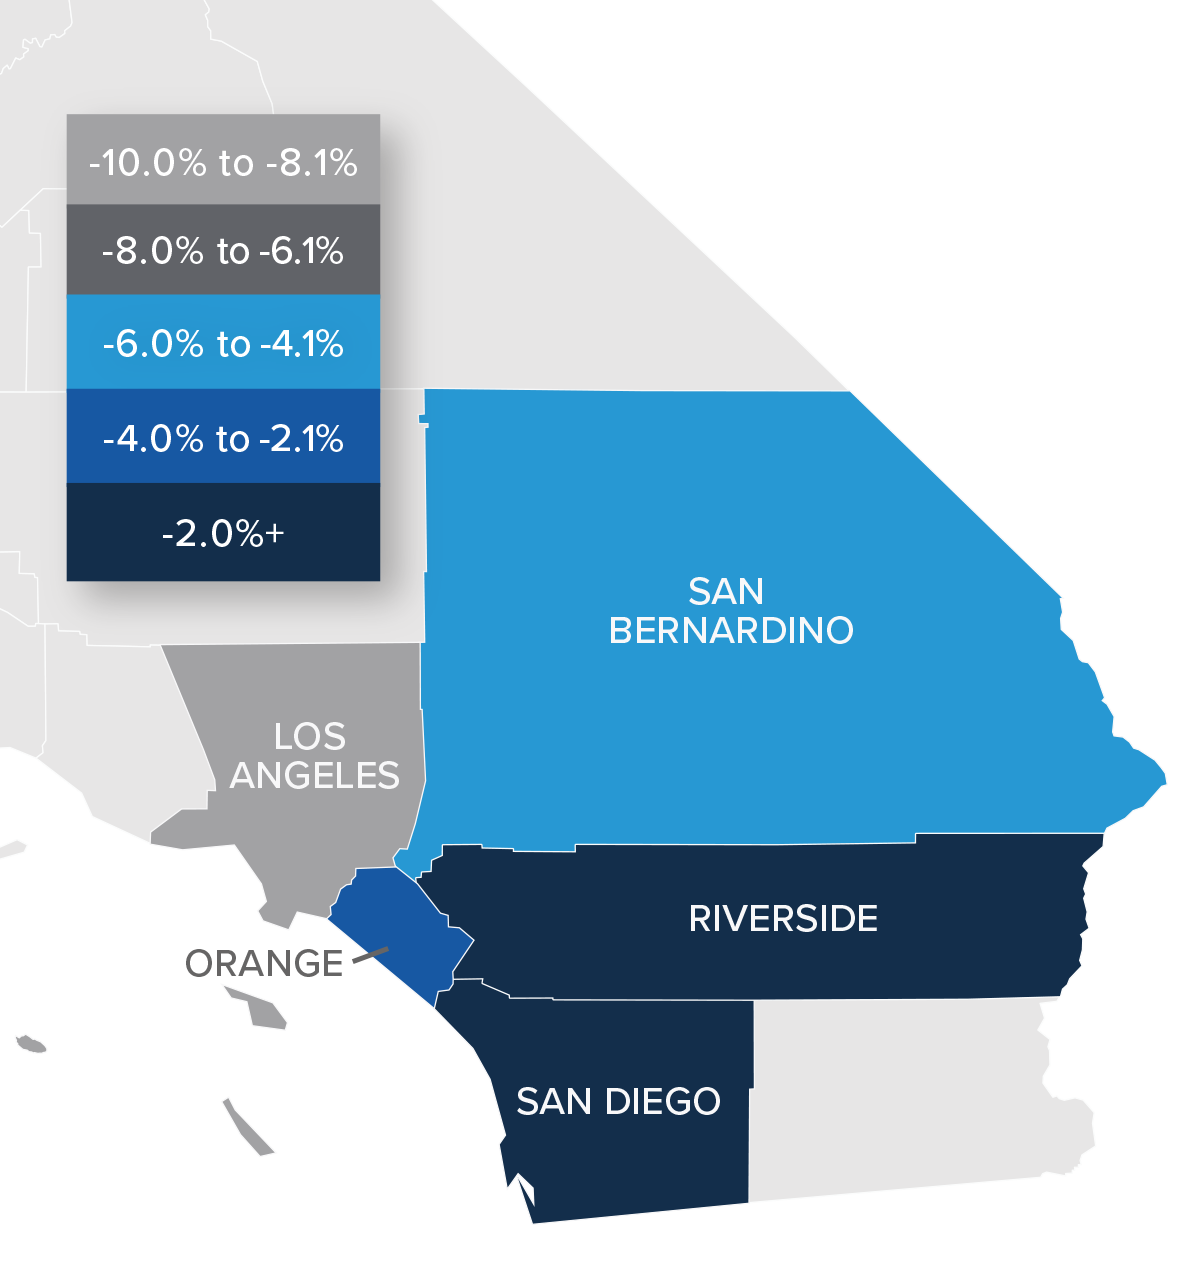 AA map showing the real estate home prices percentage changes for various counties in Southern California. Different colors correspond to different tiers of percentage change. Los Angeles County has a percentage change in the -10% to -8.1% range. San Bernardino County is in the -6% to -4.1% change range. Orange County is in the -4% to -2.1% change range and Riverside and San Diego counties are in the -2%+ change range.